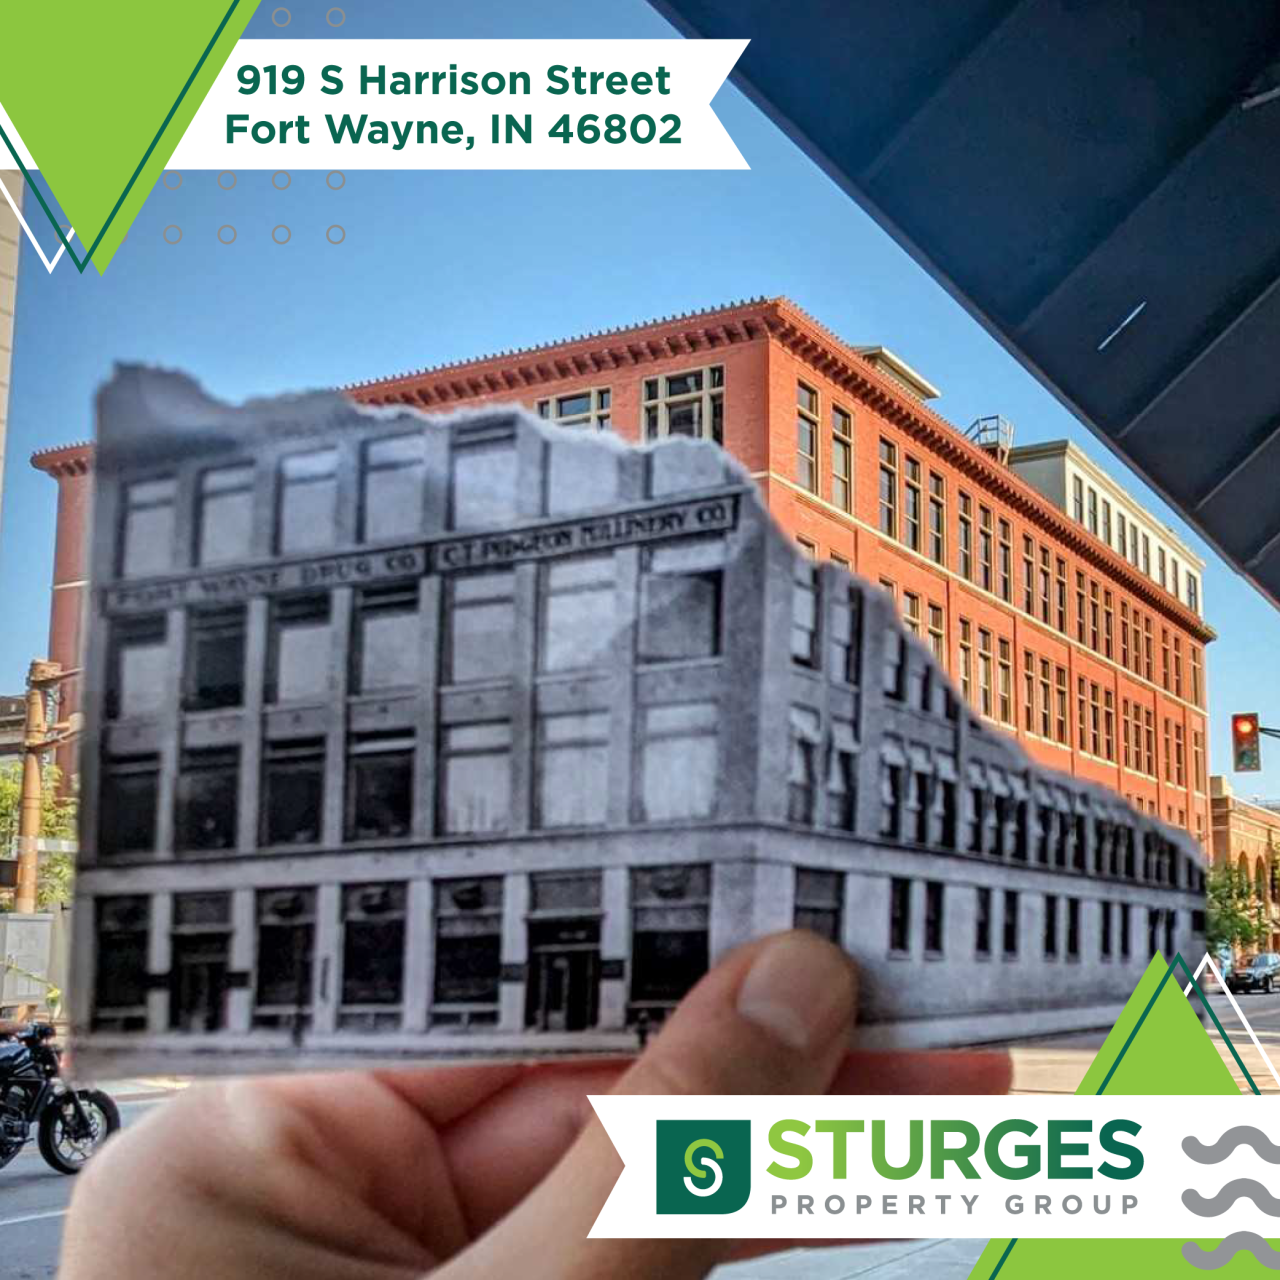 Sturges Property Group - Harrison Place, 919 S Harrison St, Fort Wayne, IN 46802